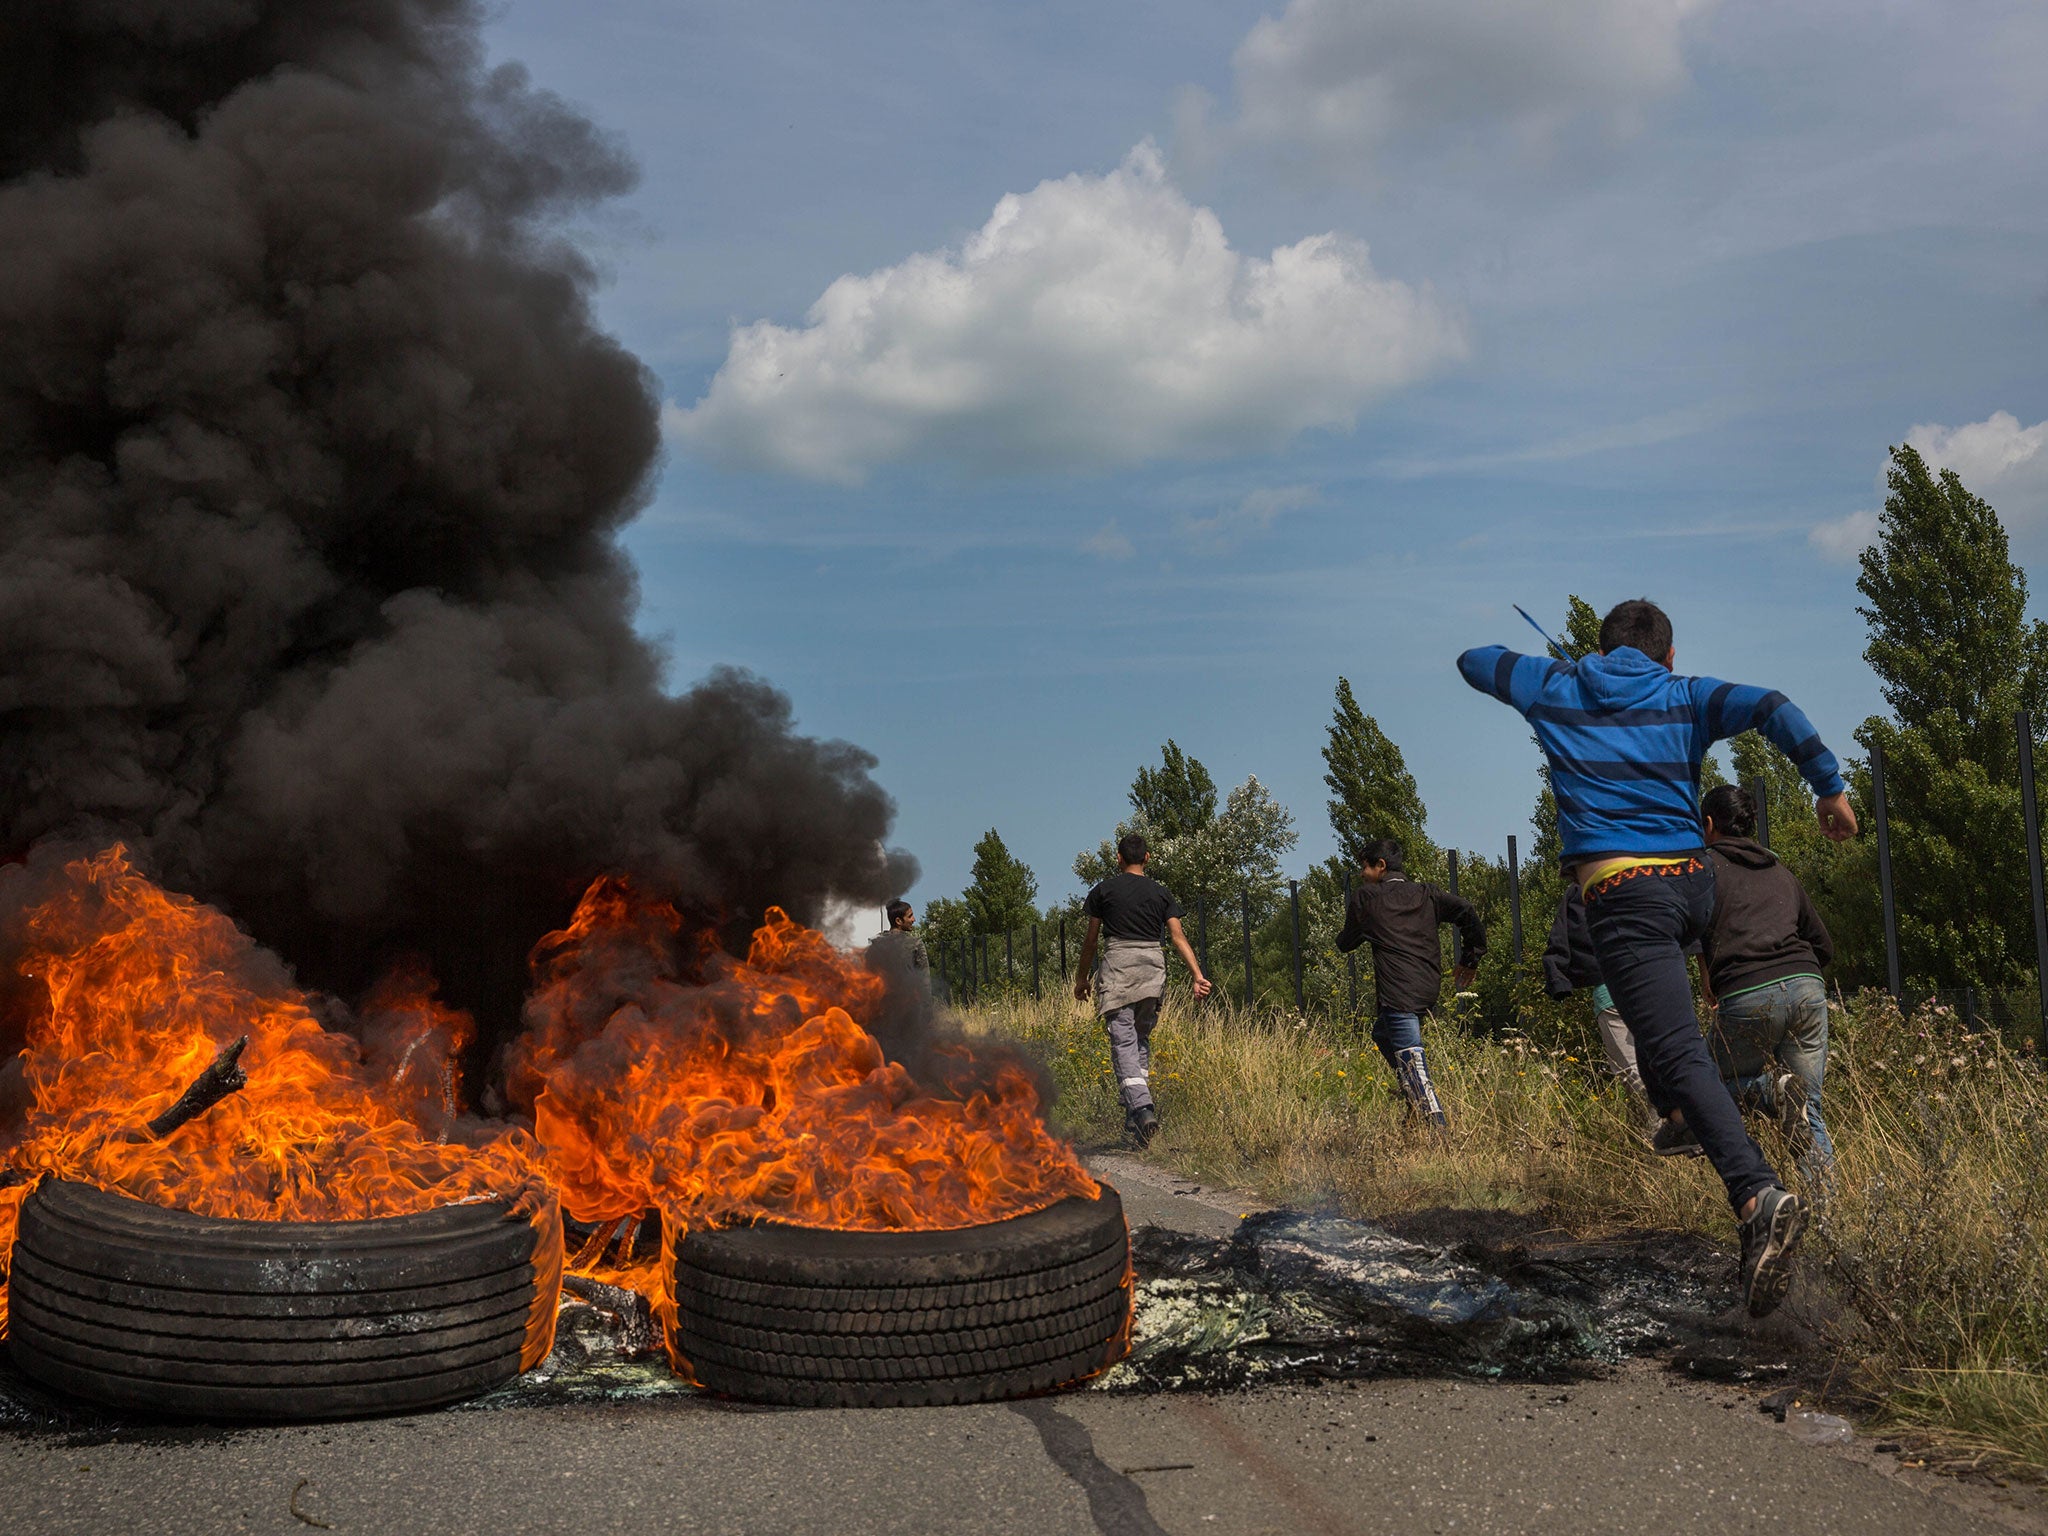 People run past tyres burning on a road leading to the port of Calais on July 31, 2015 in Calais (Getty)